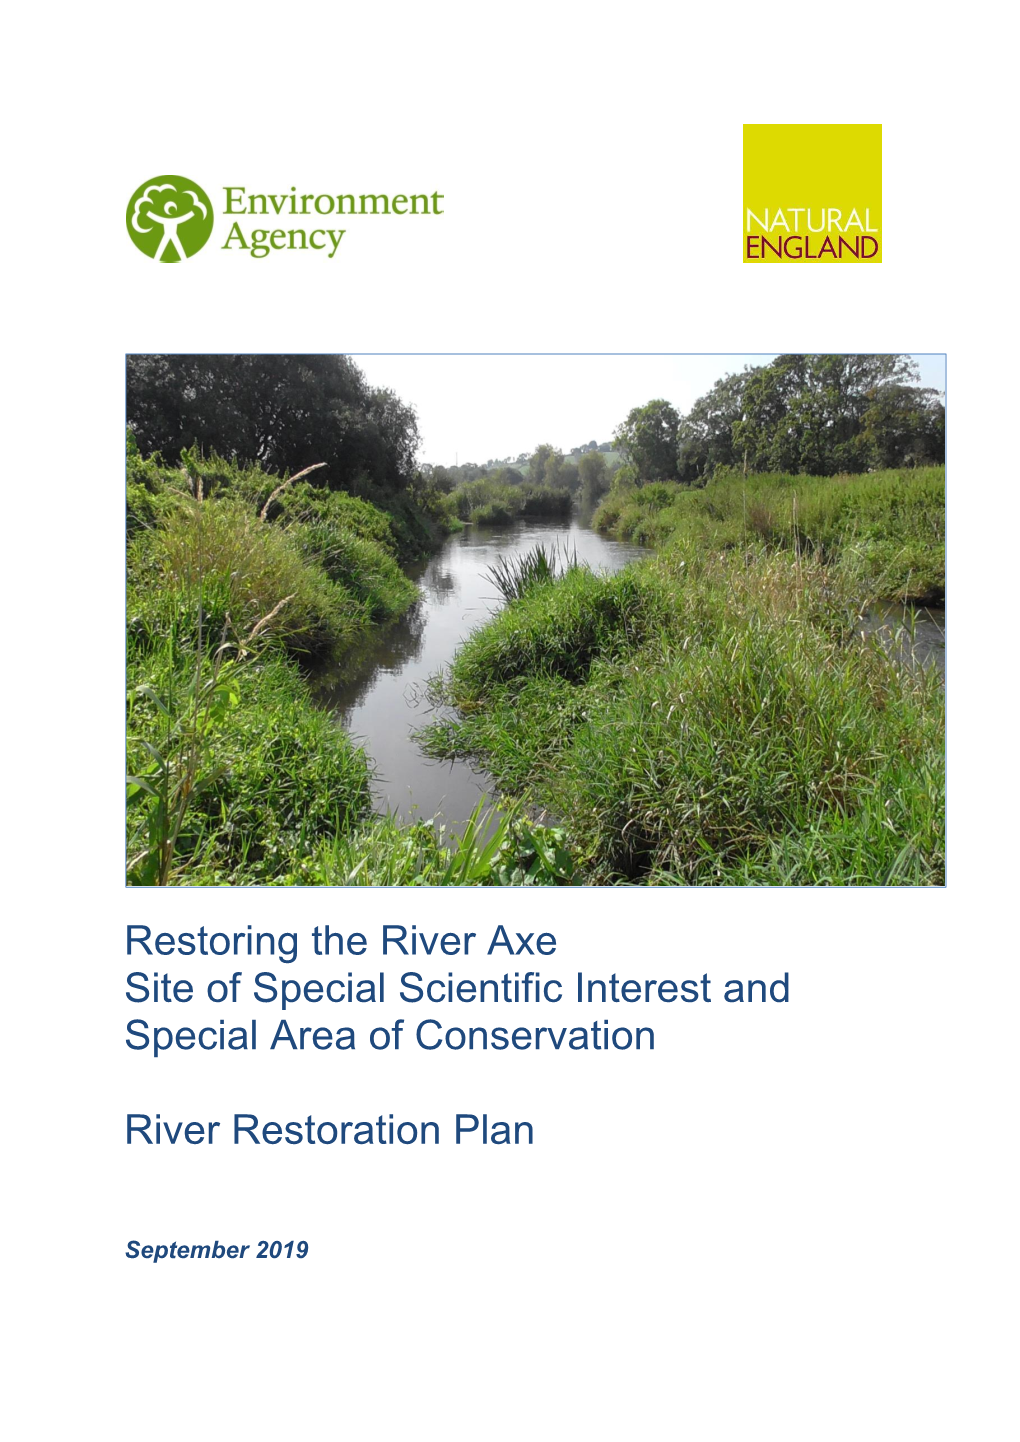 Restoring the River Axe Site of Special Scientific Interest and Special Area of Conservation River Restoration Plan